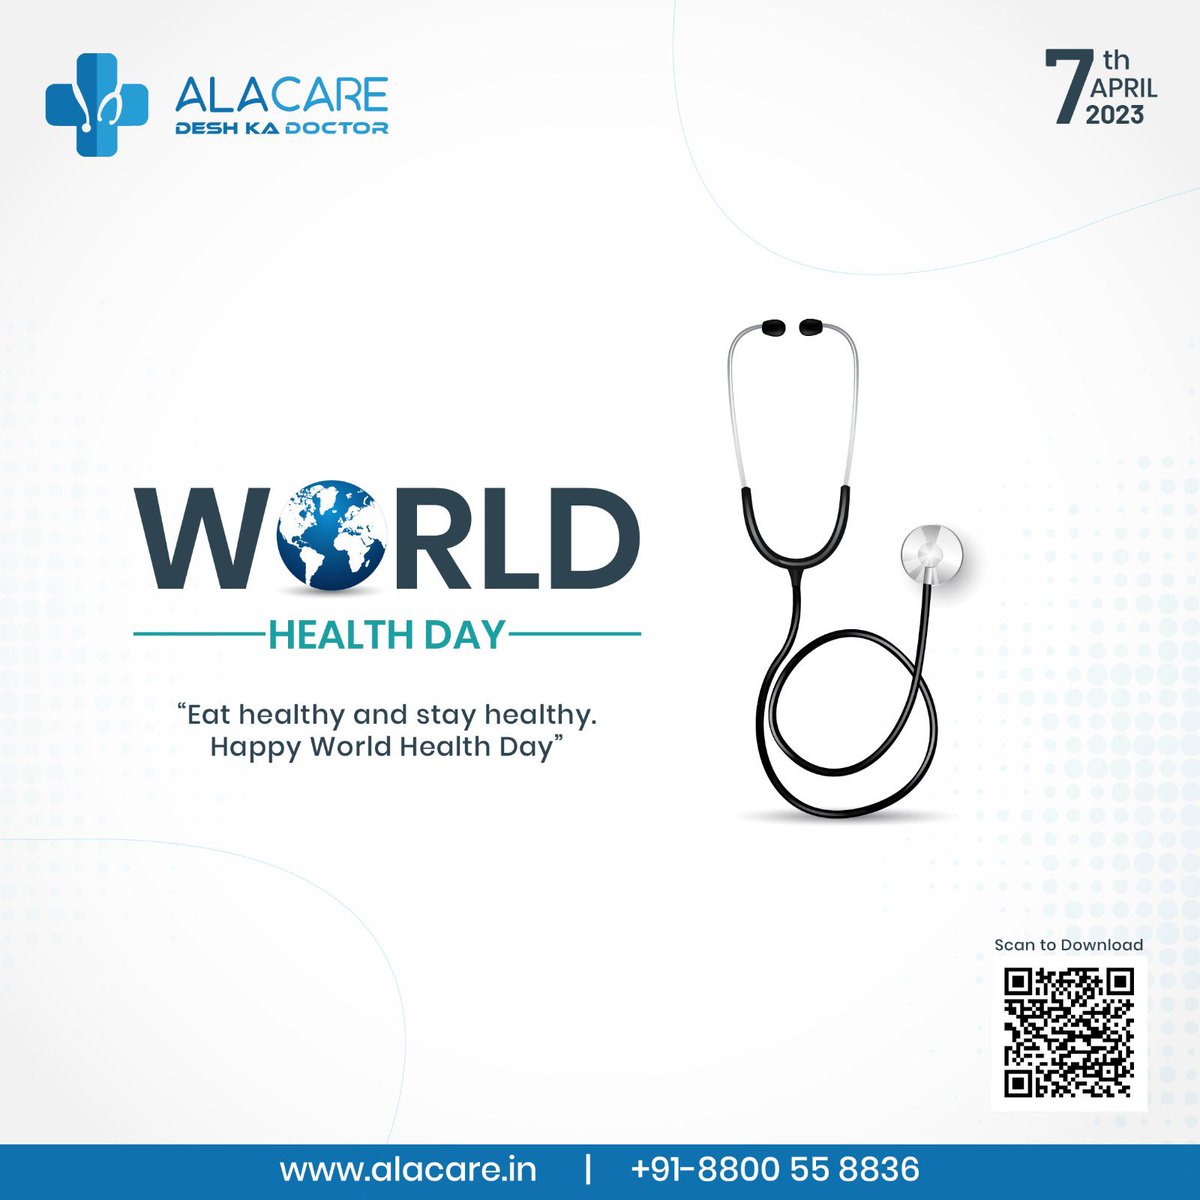 The greatest gift you can give to your family and the world is a healthy you.
We never value our health until we lose it. Don’t let that happen to you take care of your health. Happy World Health Day to you.
#WorldHealthDay2023 #deshkadoctor #alacare #healthiswealth